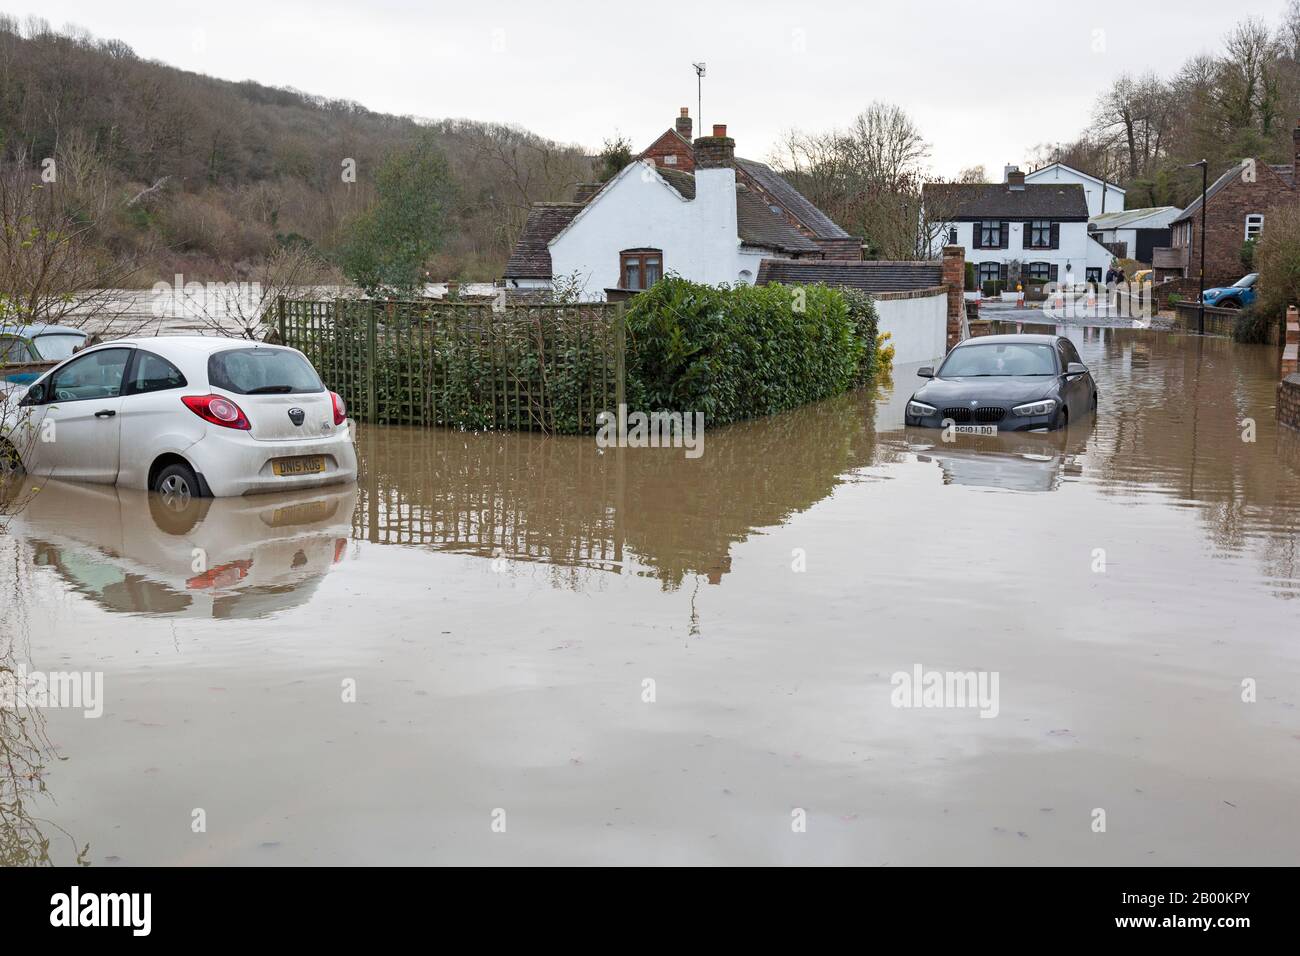 Jackfield, Shropshire, UK. 18th Feb 2020. As river levels continue to rise, the village of Jackfield in Shropshire, experiences its worst flooding in 20 years, as the River Severn bursts its banks, flooding houses and businesses. Credit: Rob Carter/Alamy Live News Stock Photo